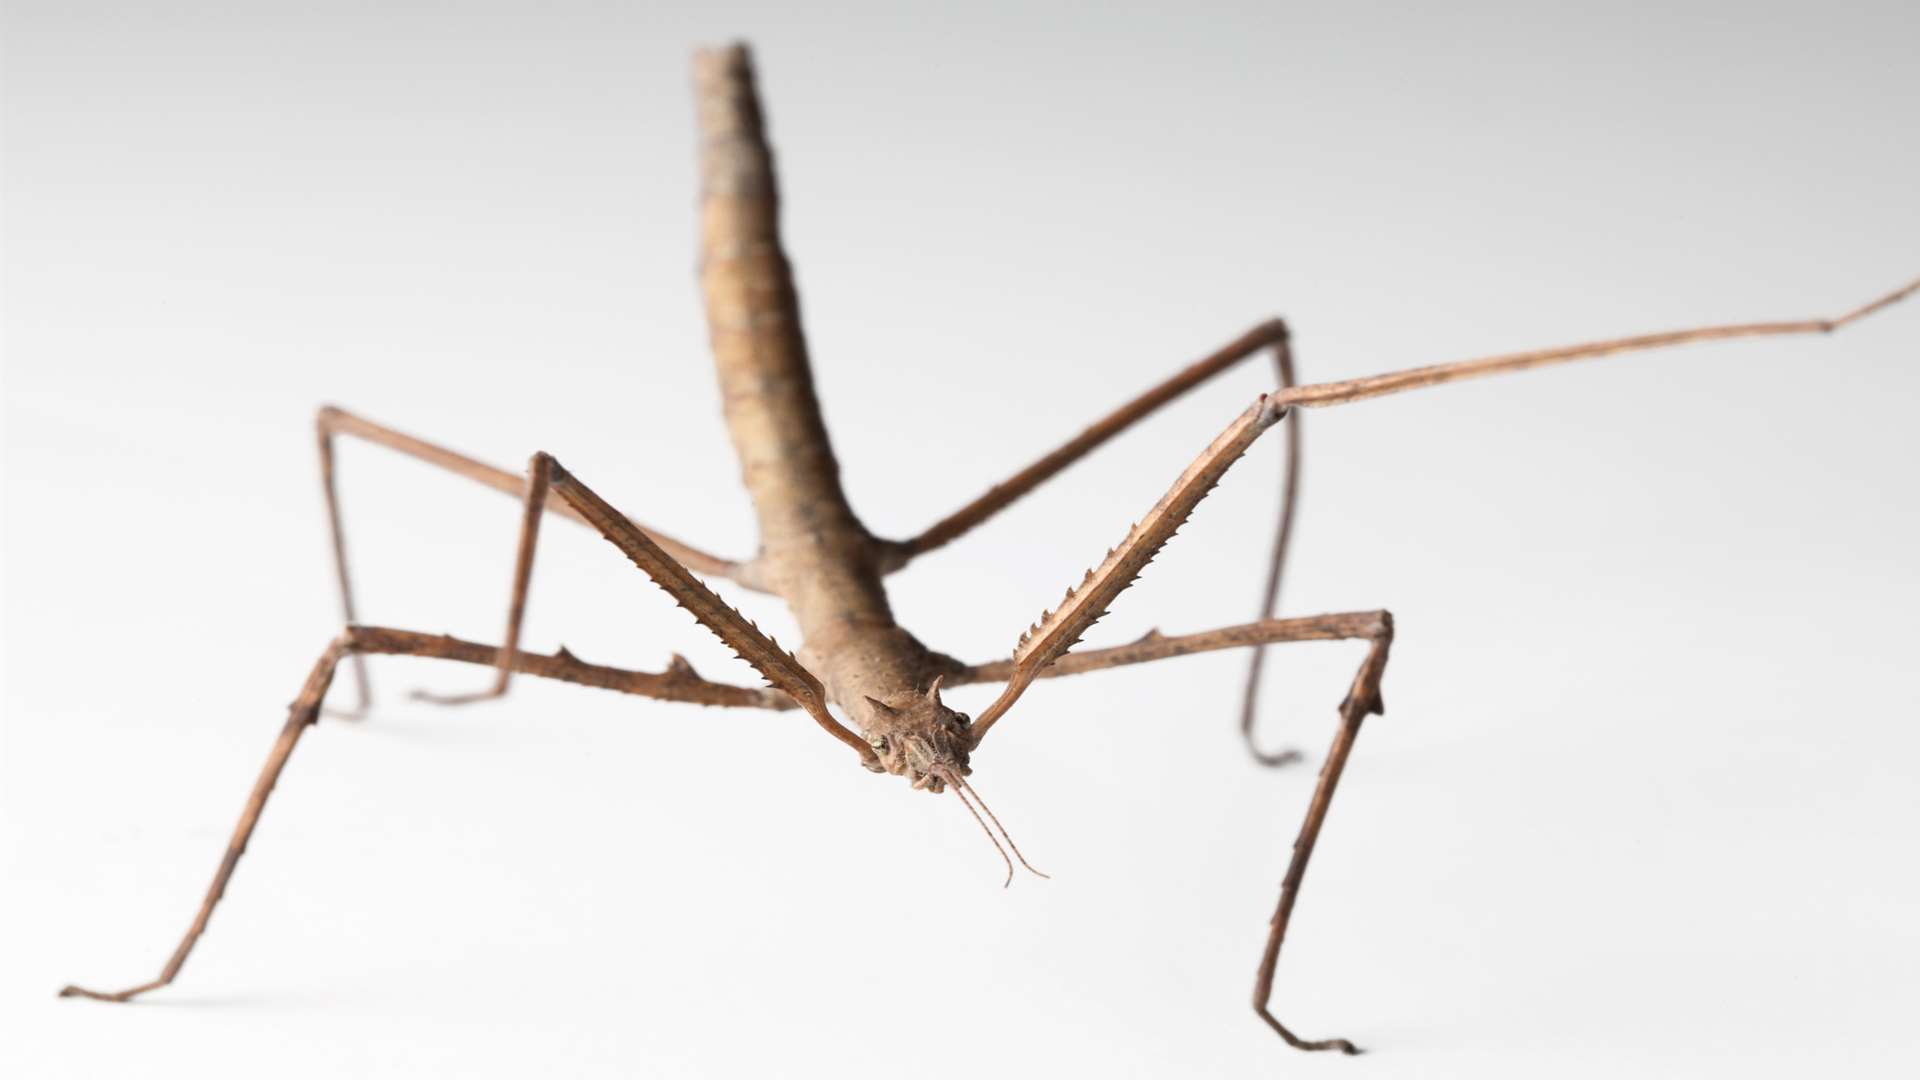 Get up close to a stick insect